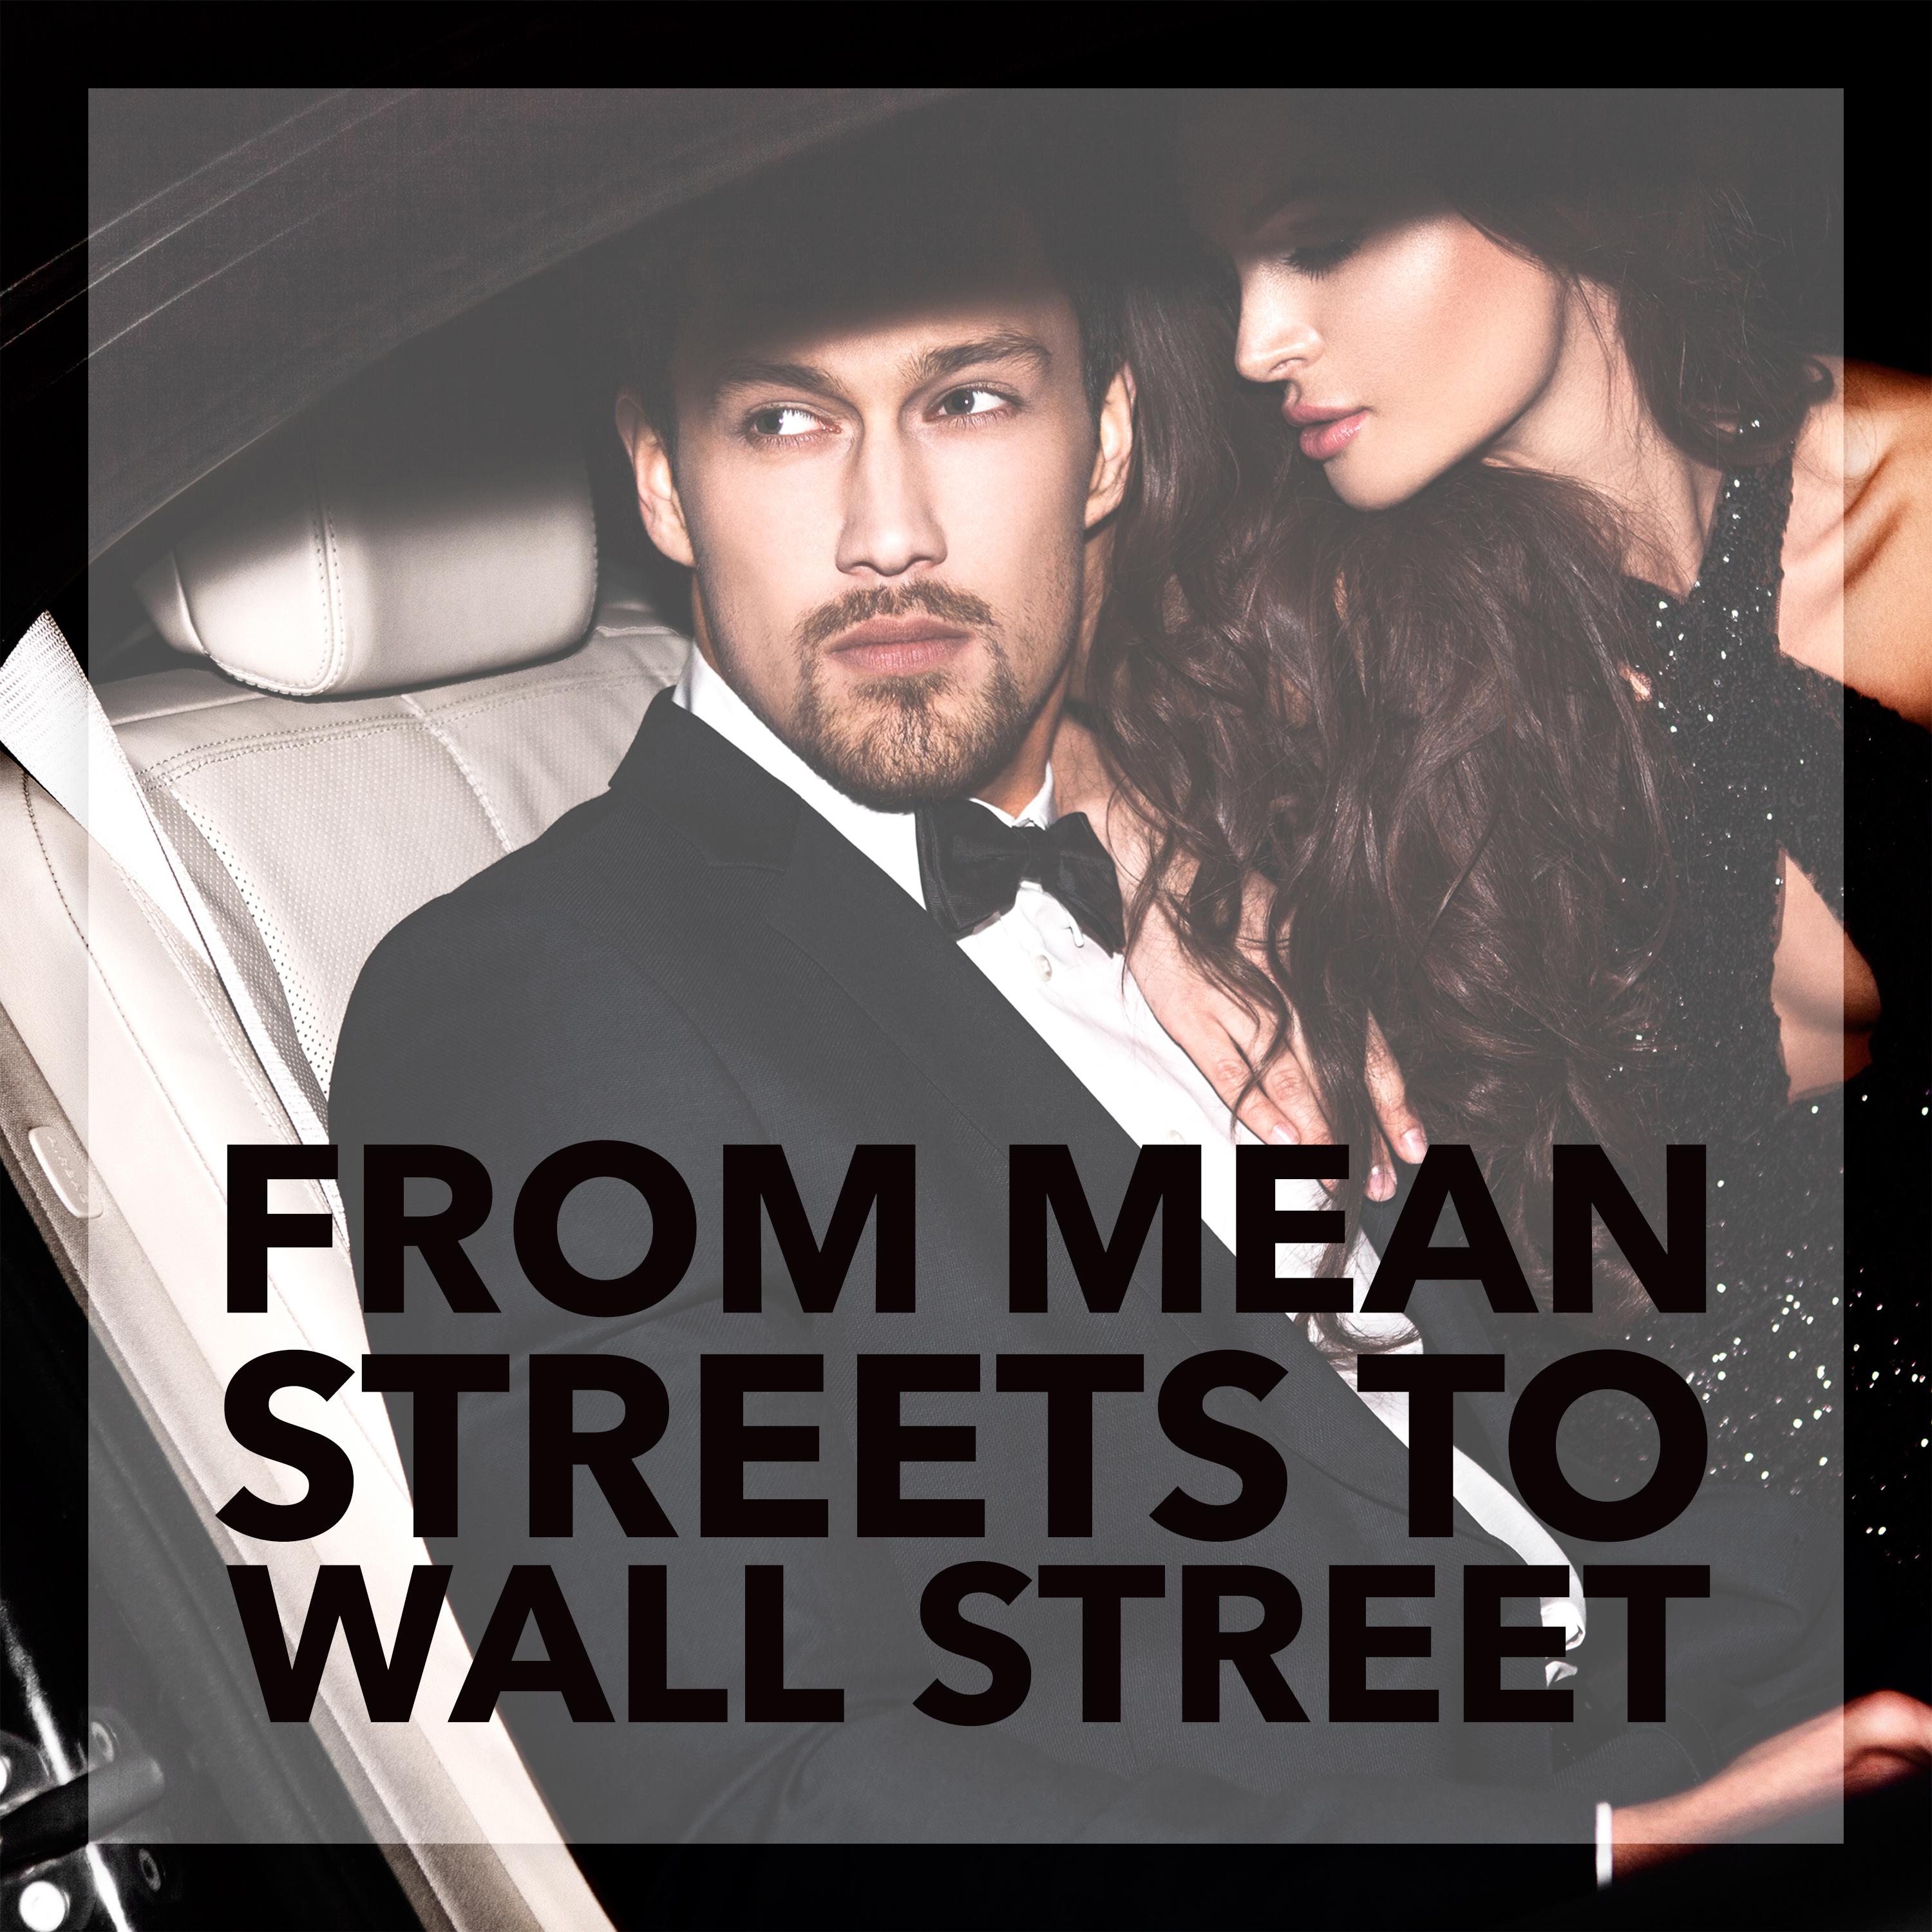 From Mean Streets To Wall Street